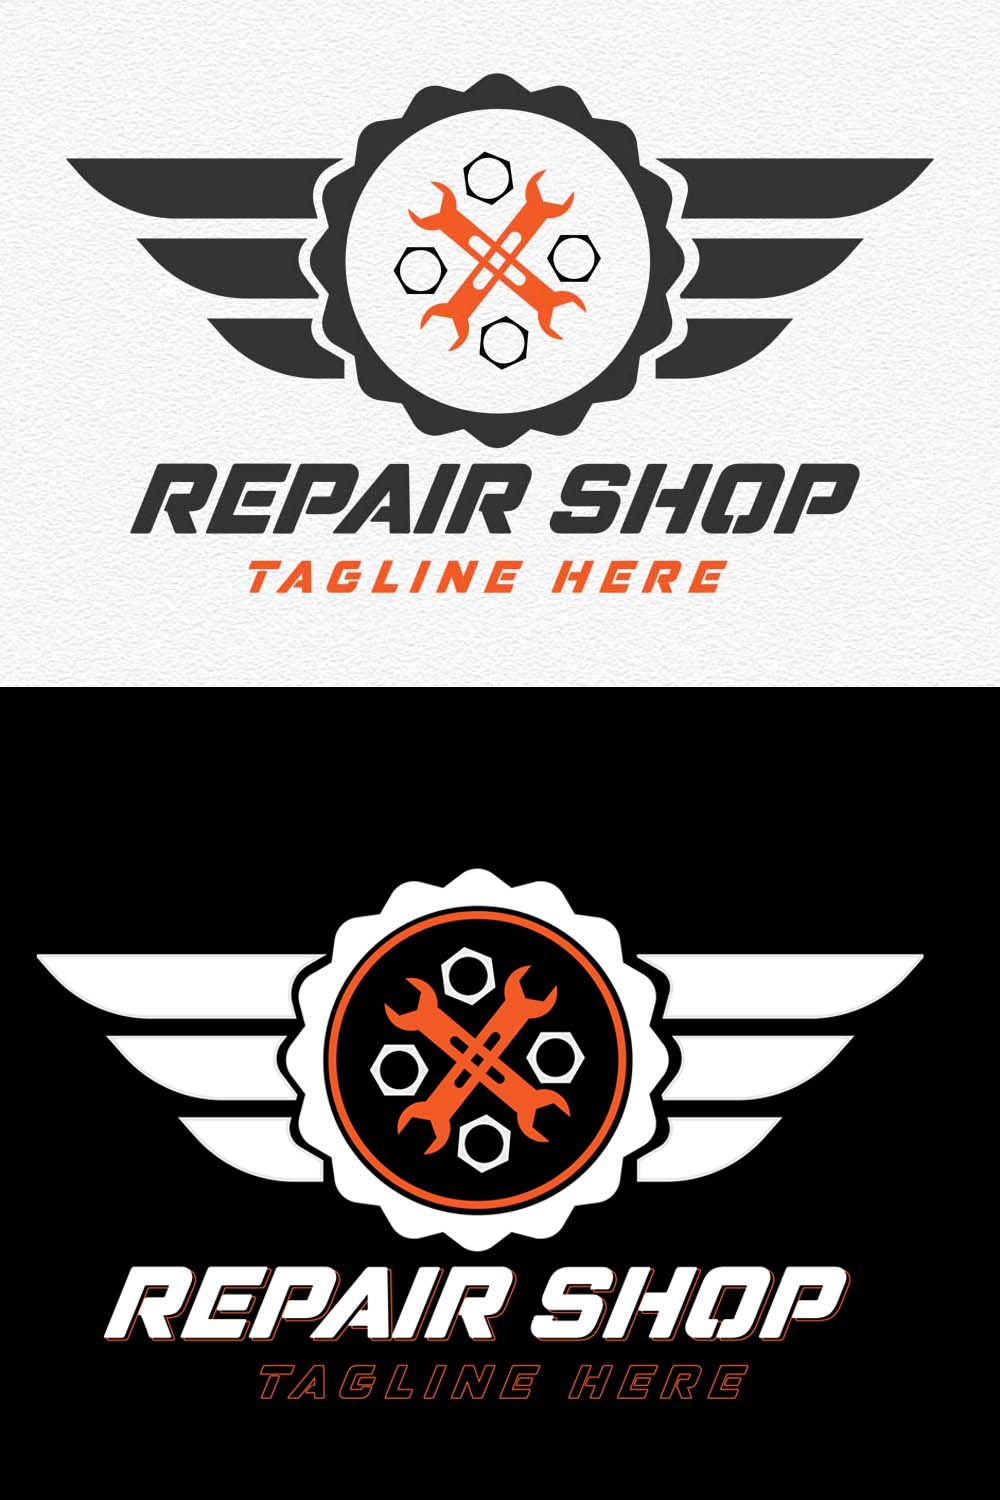 Repair shop logo can be used in 100% editable AI EPS, JPEG, PNG format pinterest preview image.